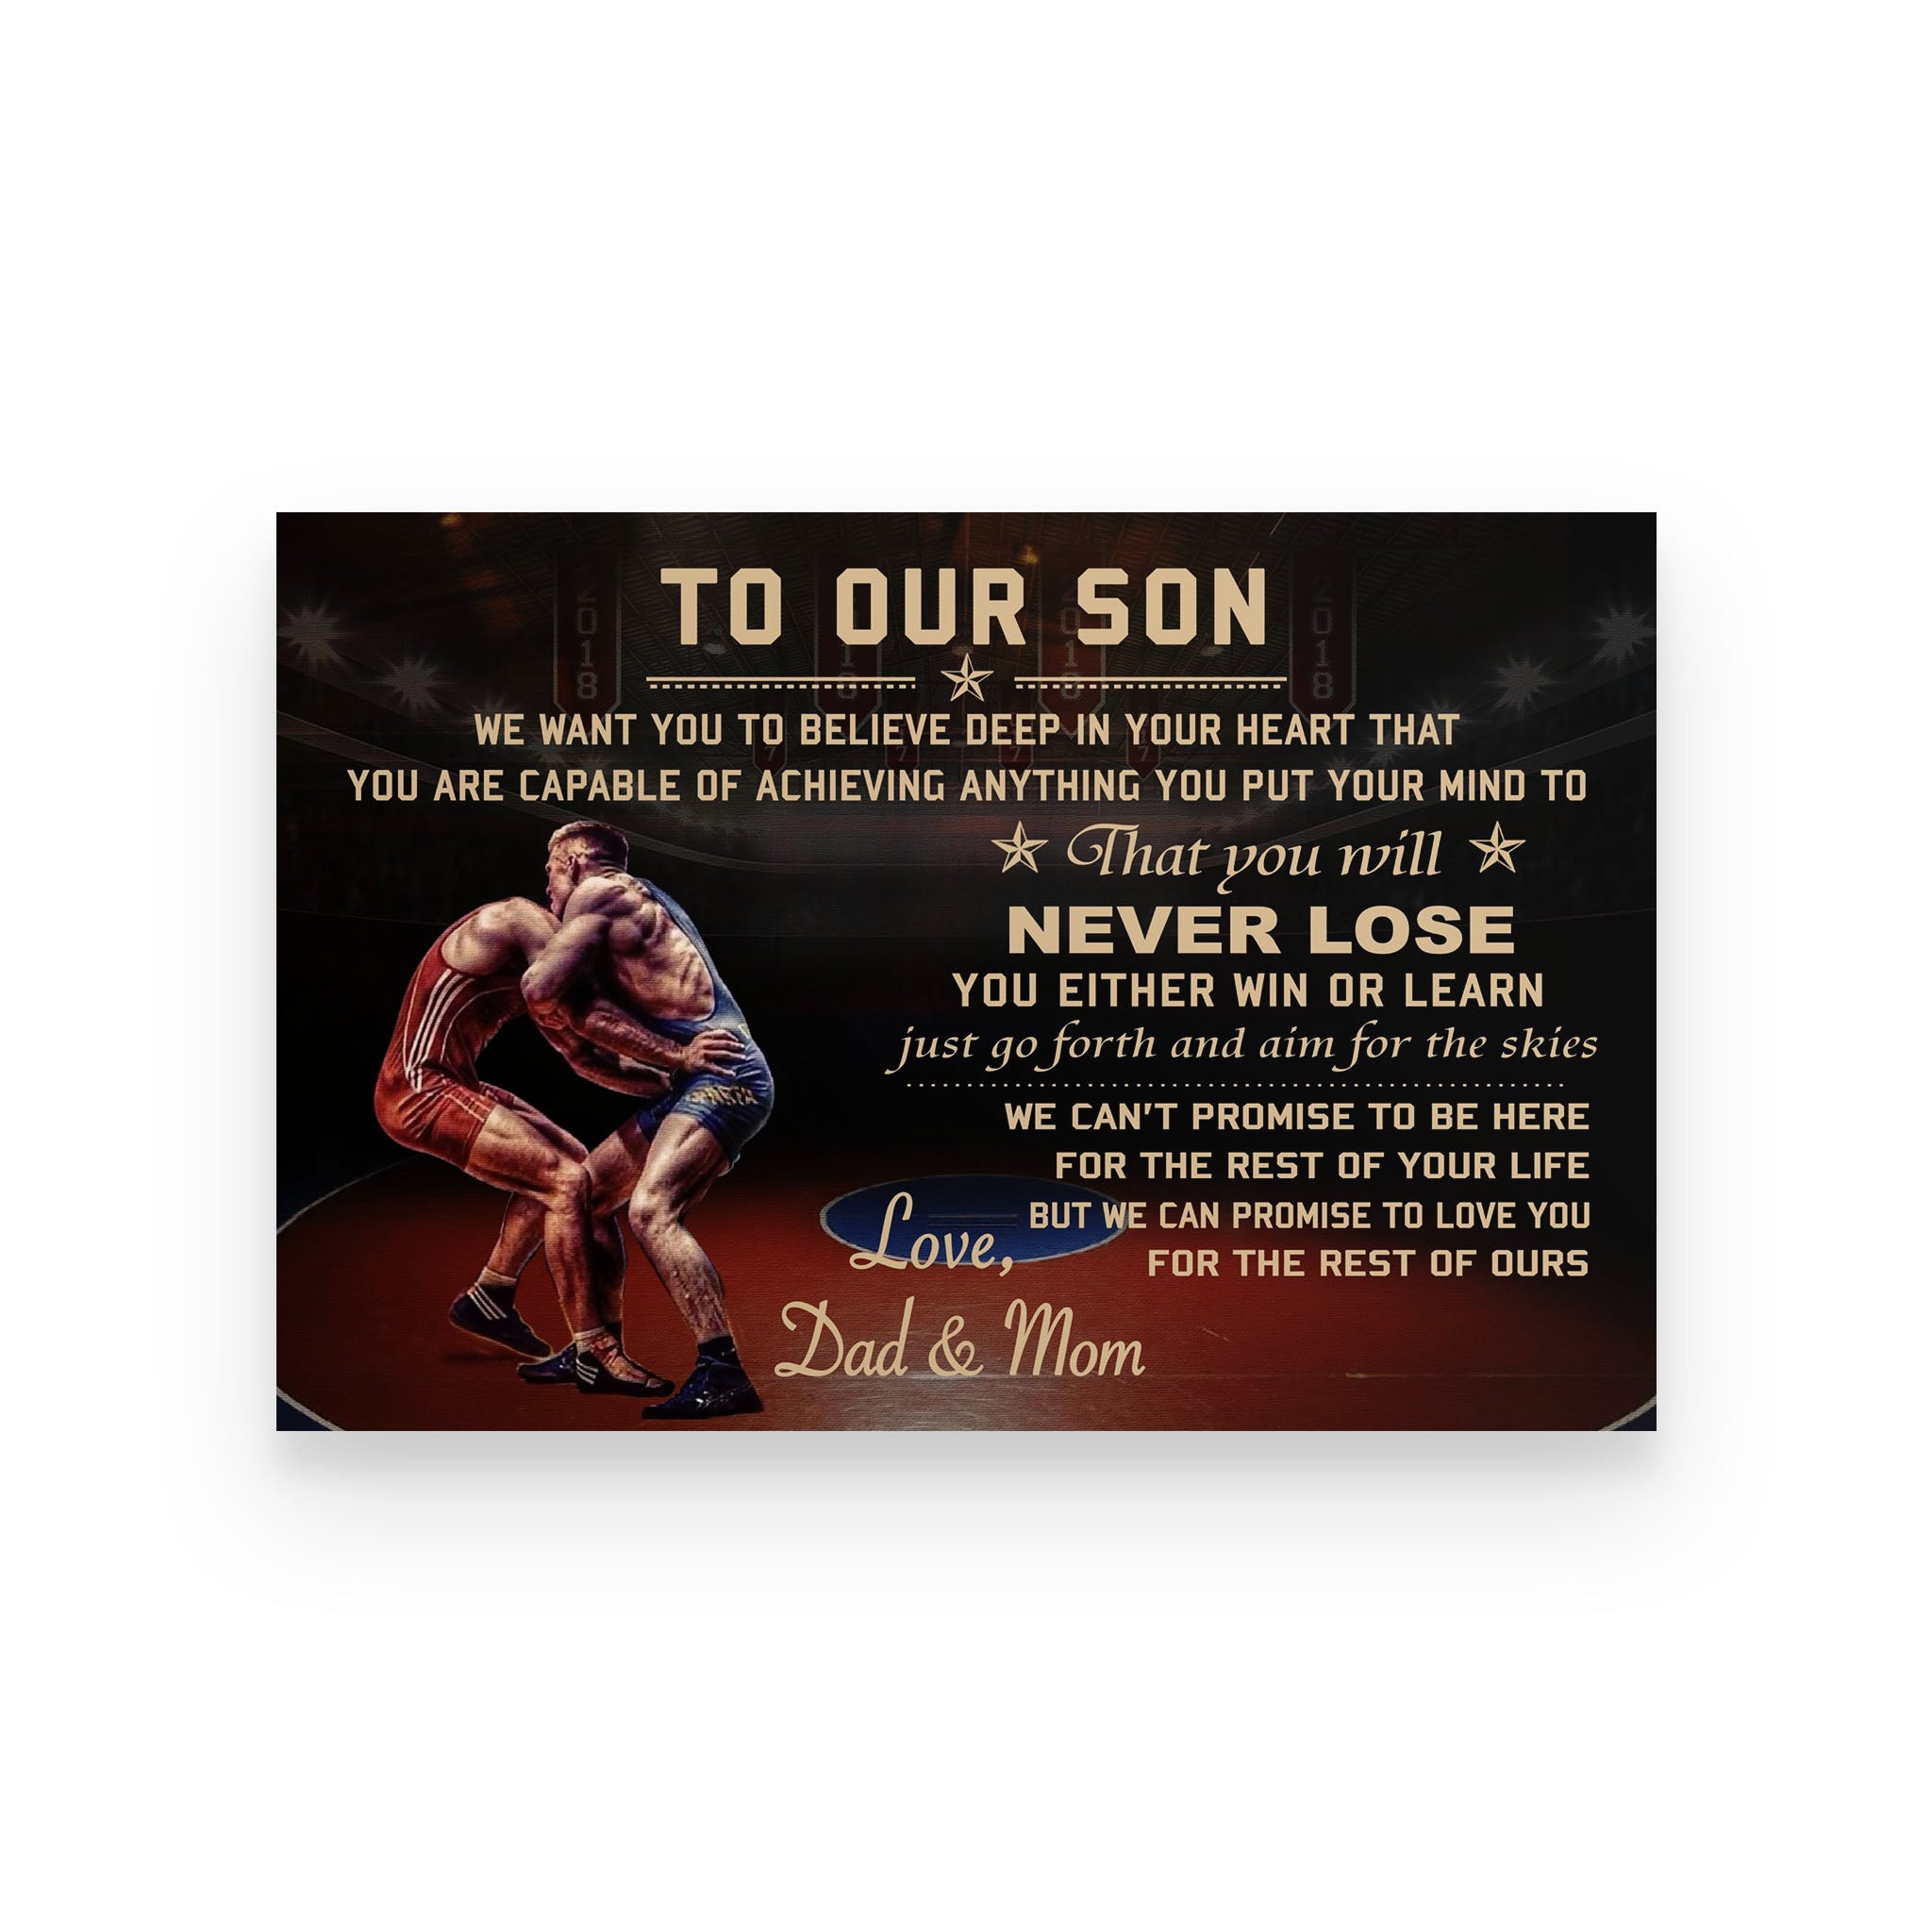 Wrestling poster mom and dad to son we want you to believe deep in your heart